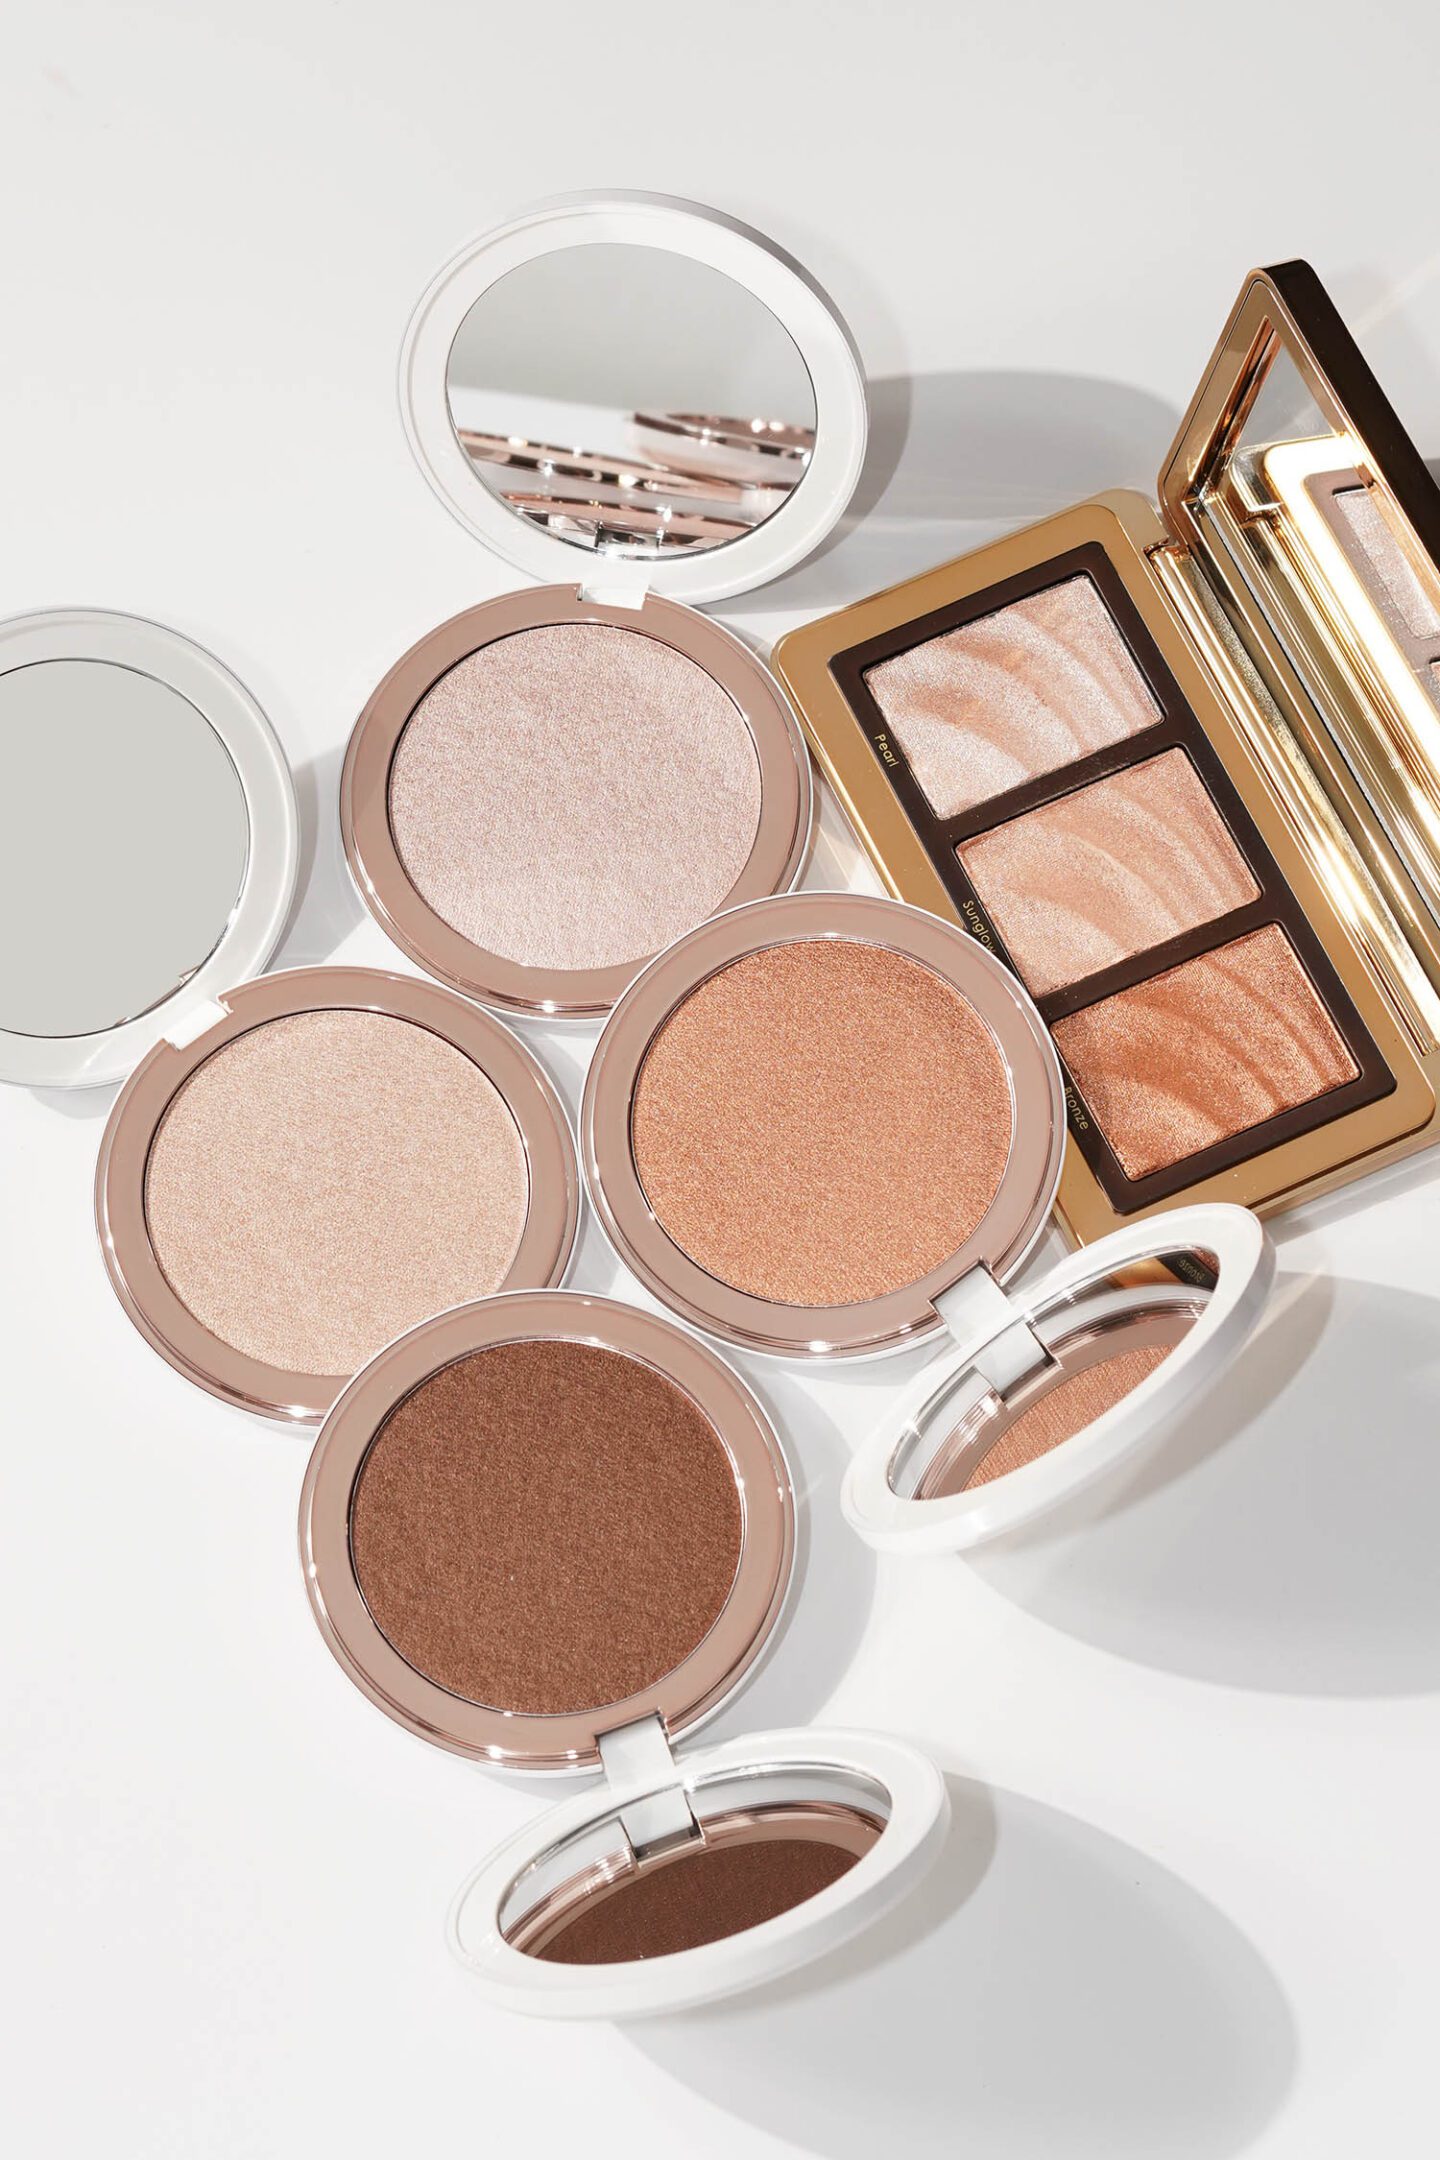 Natasha Denona Golden Highlighter Trio and Hy-Gen Skincare Infused Glow Beautifiers